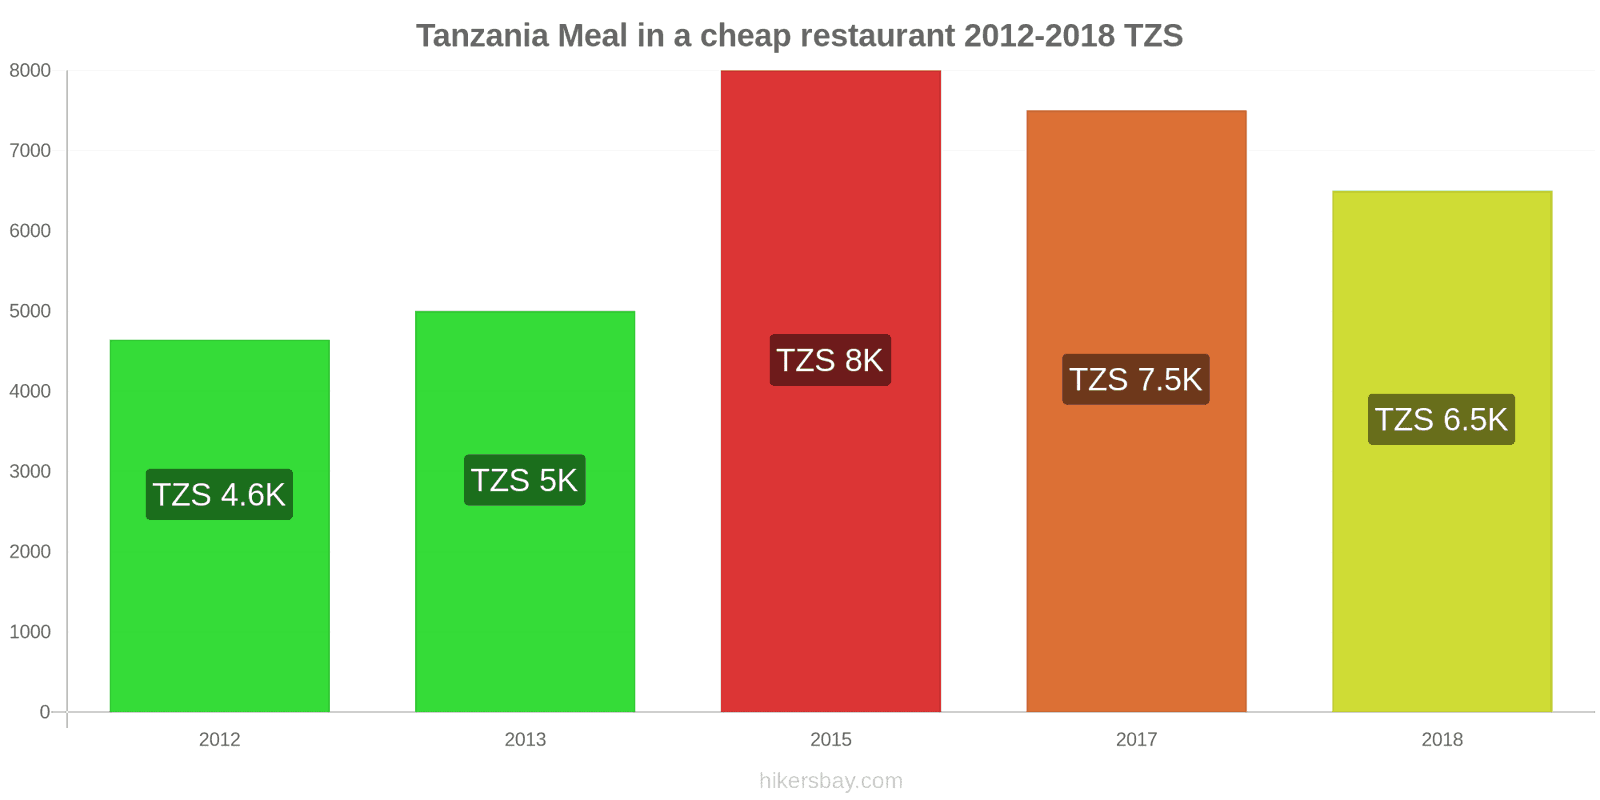 Tanzania price changes Meal in a cheap restaurant hikersbay.com